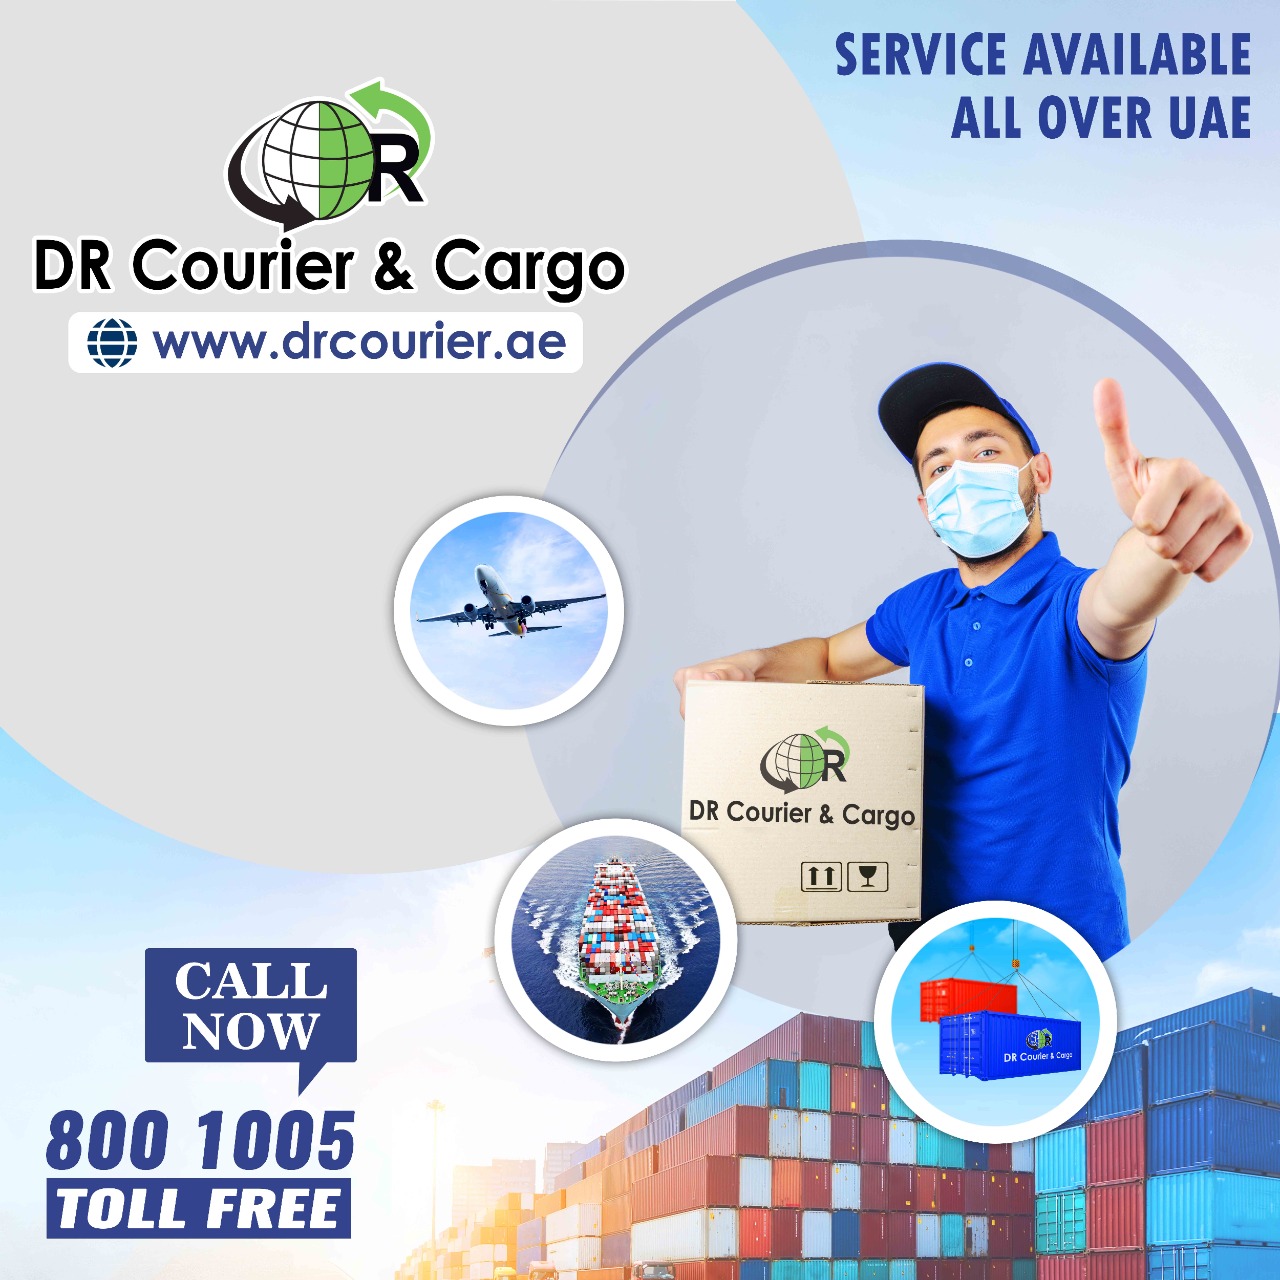 Service Available All Over UAE